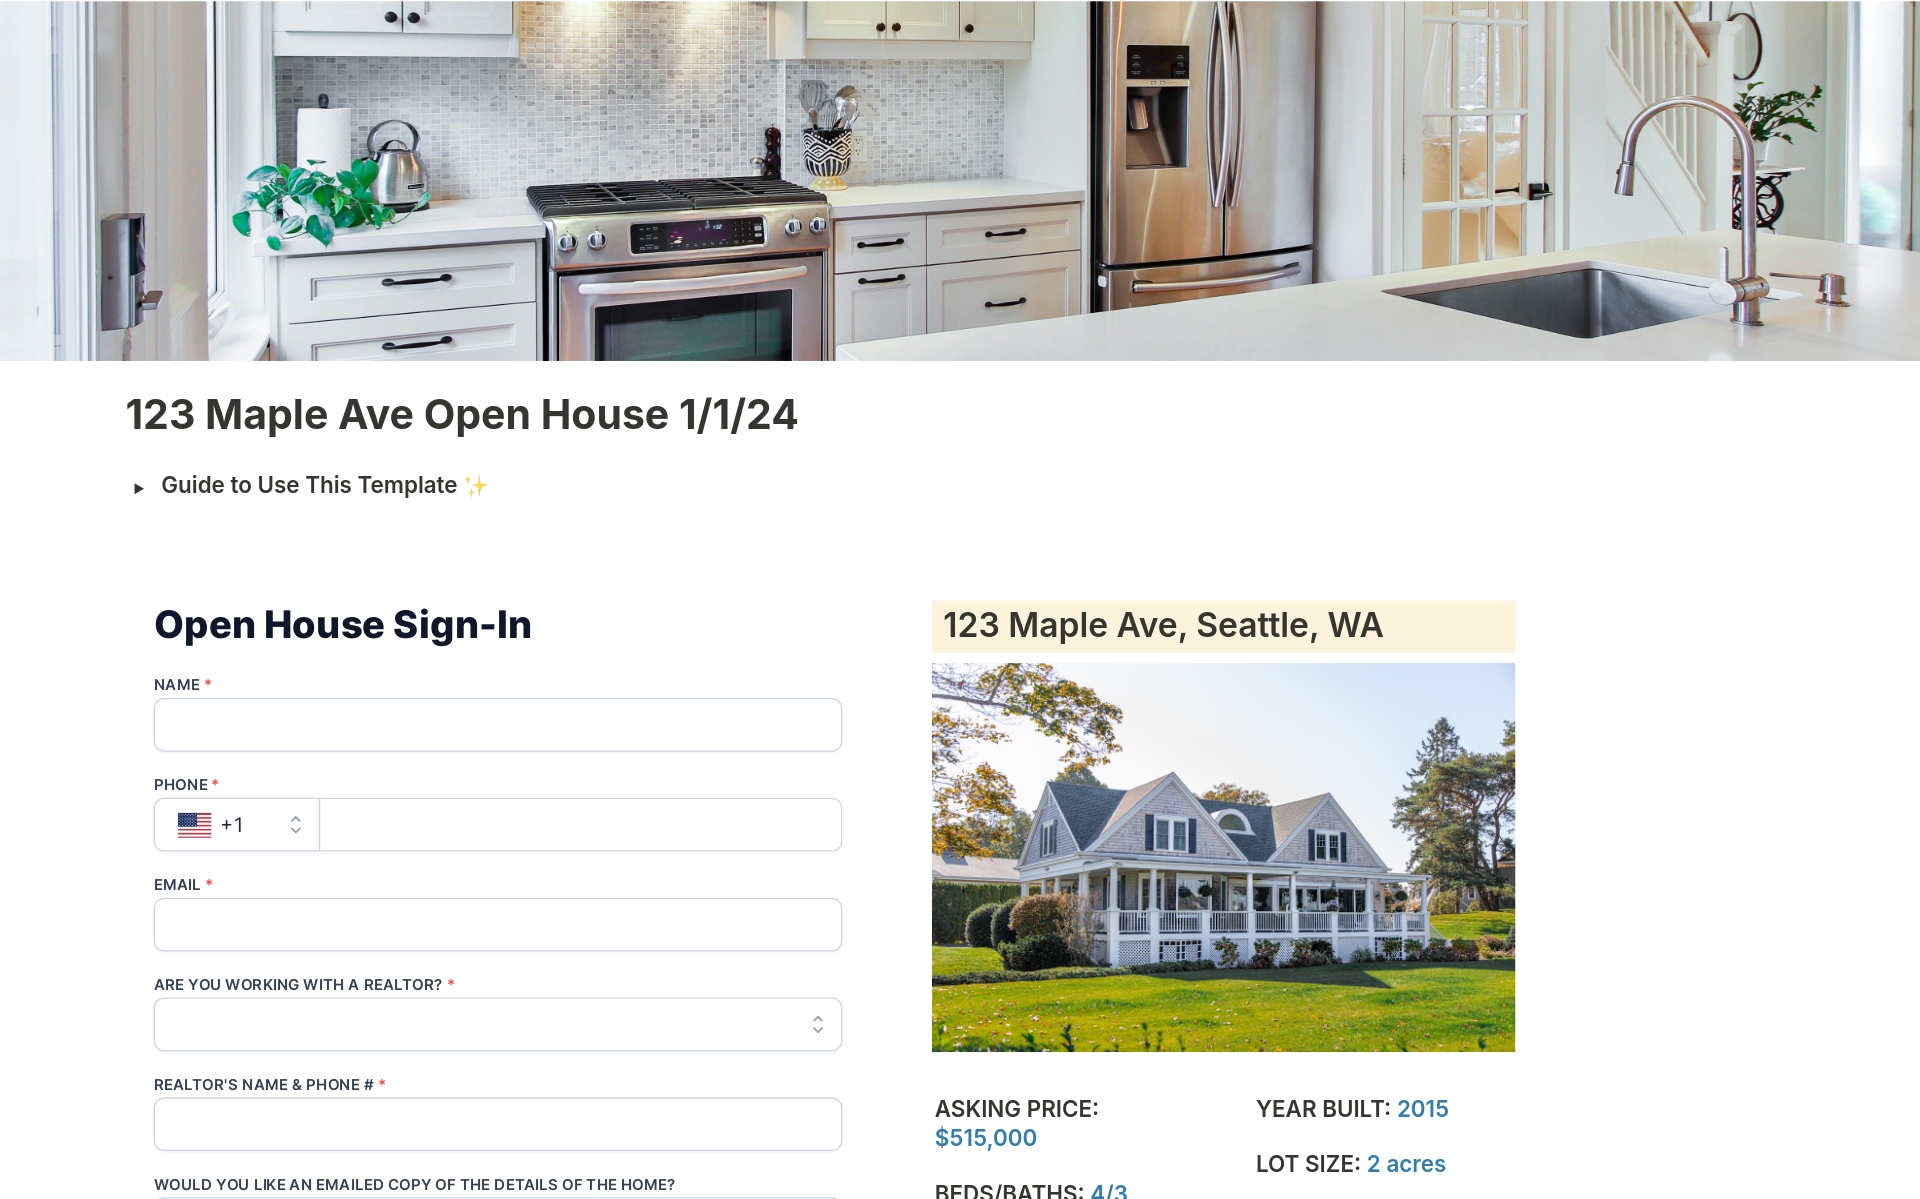 Make your open houses more efficient and professional with our Real Estate Open House Sign-In Notion Template! Say goodbye to pen and paper sign-ins and hello to seamless data capture directly into your Notion database.